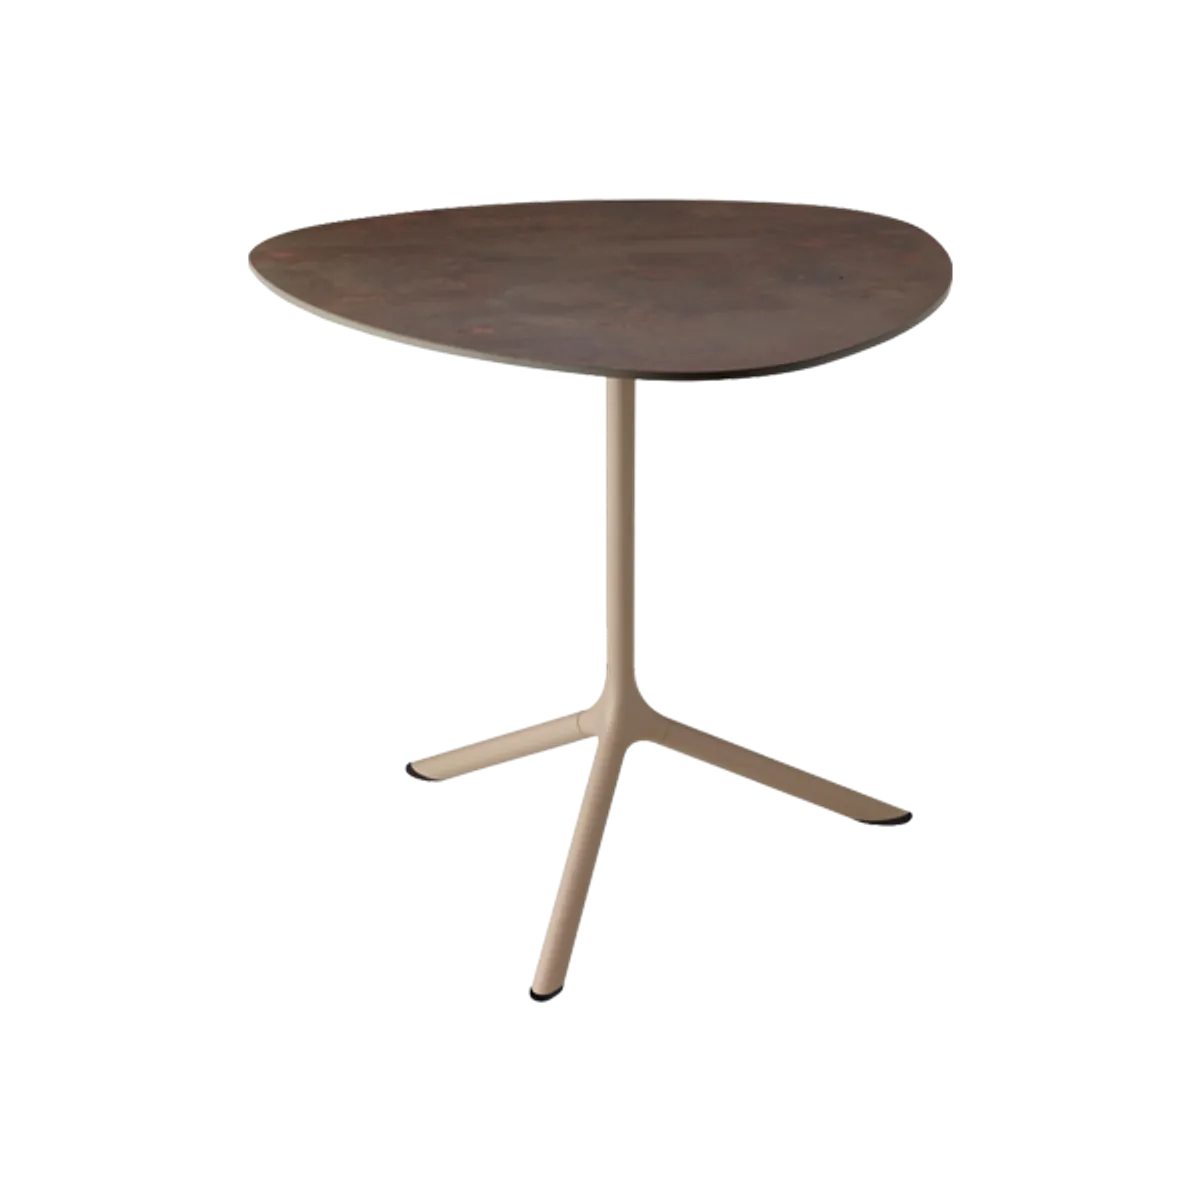 Trinette triangular table Inside Out Contracts